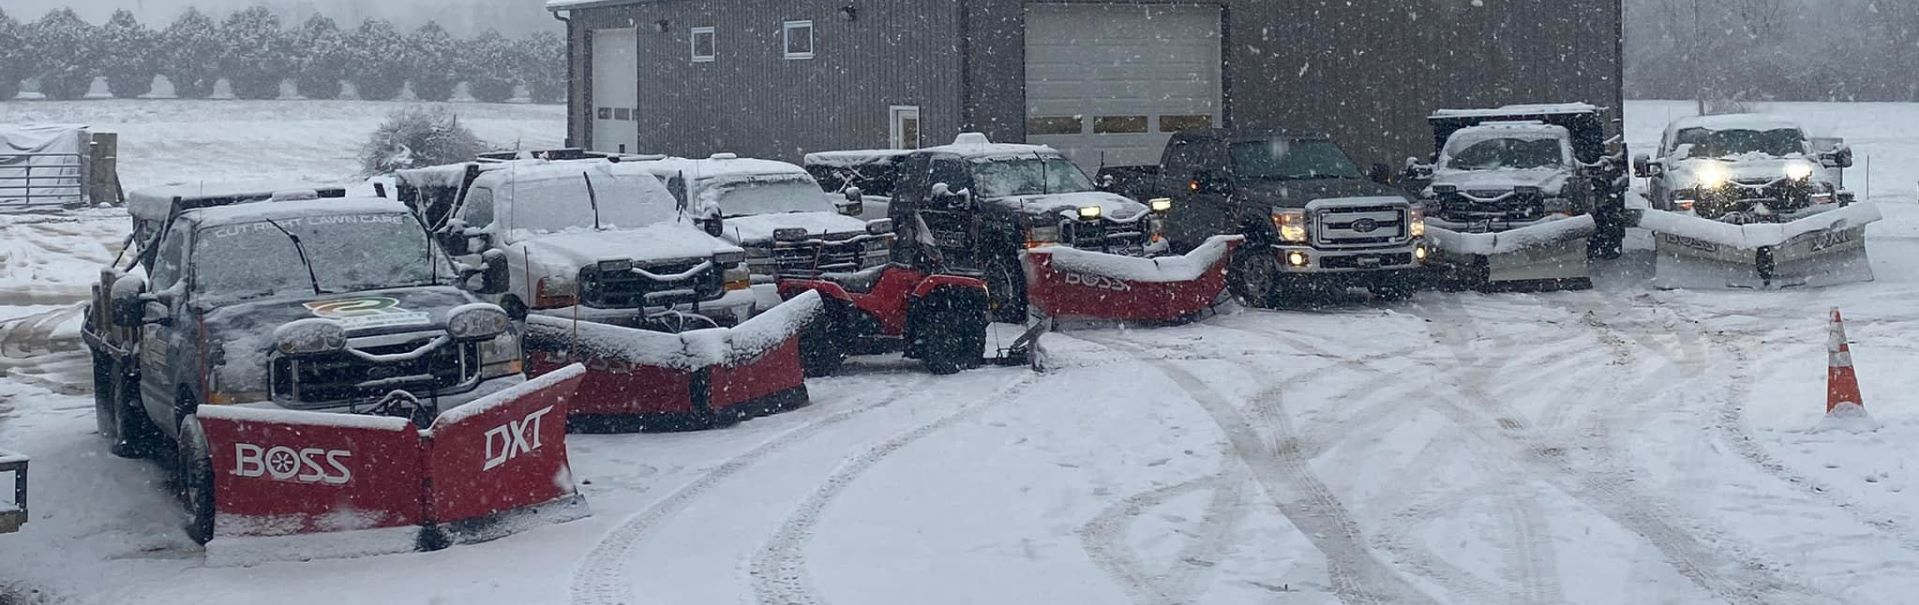 pickup trucks lined up for commercial snow removal service with snow falling in southeast michigan